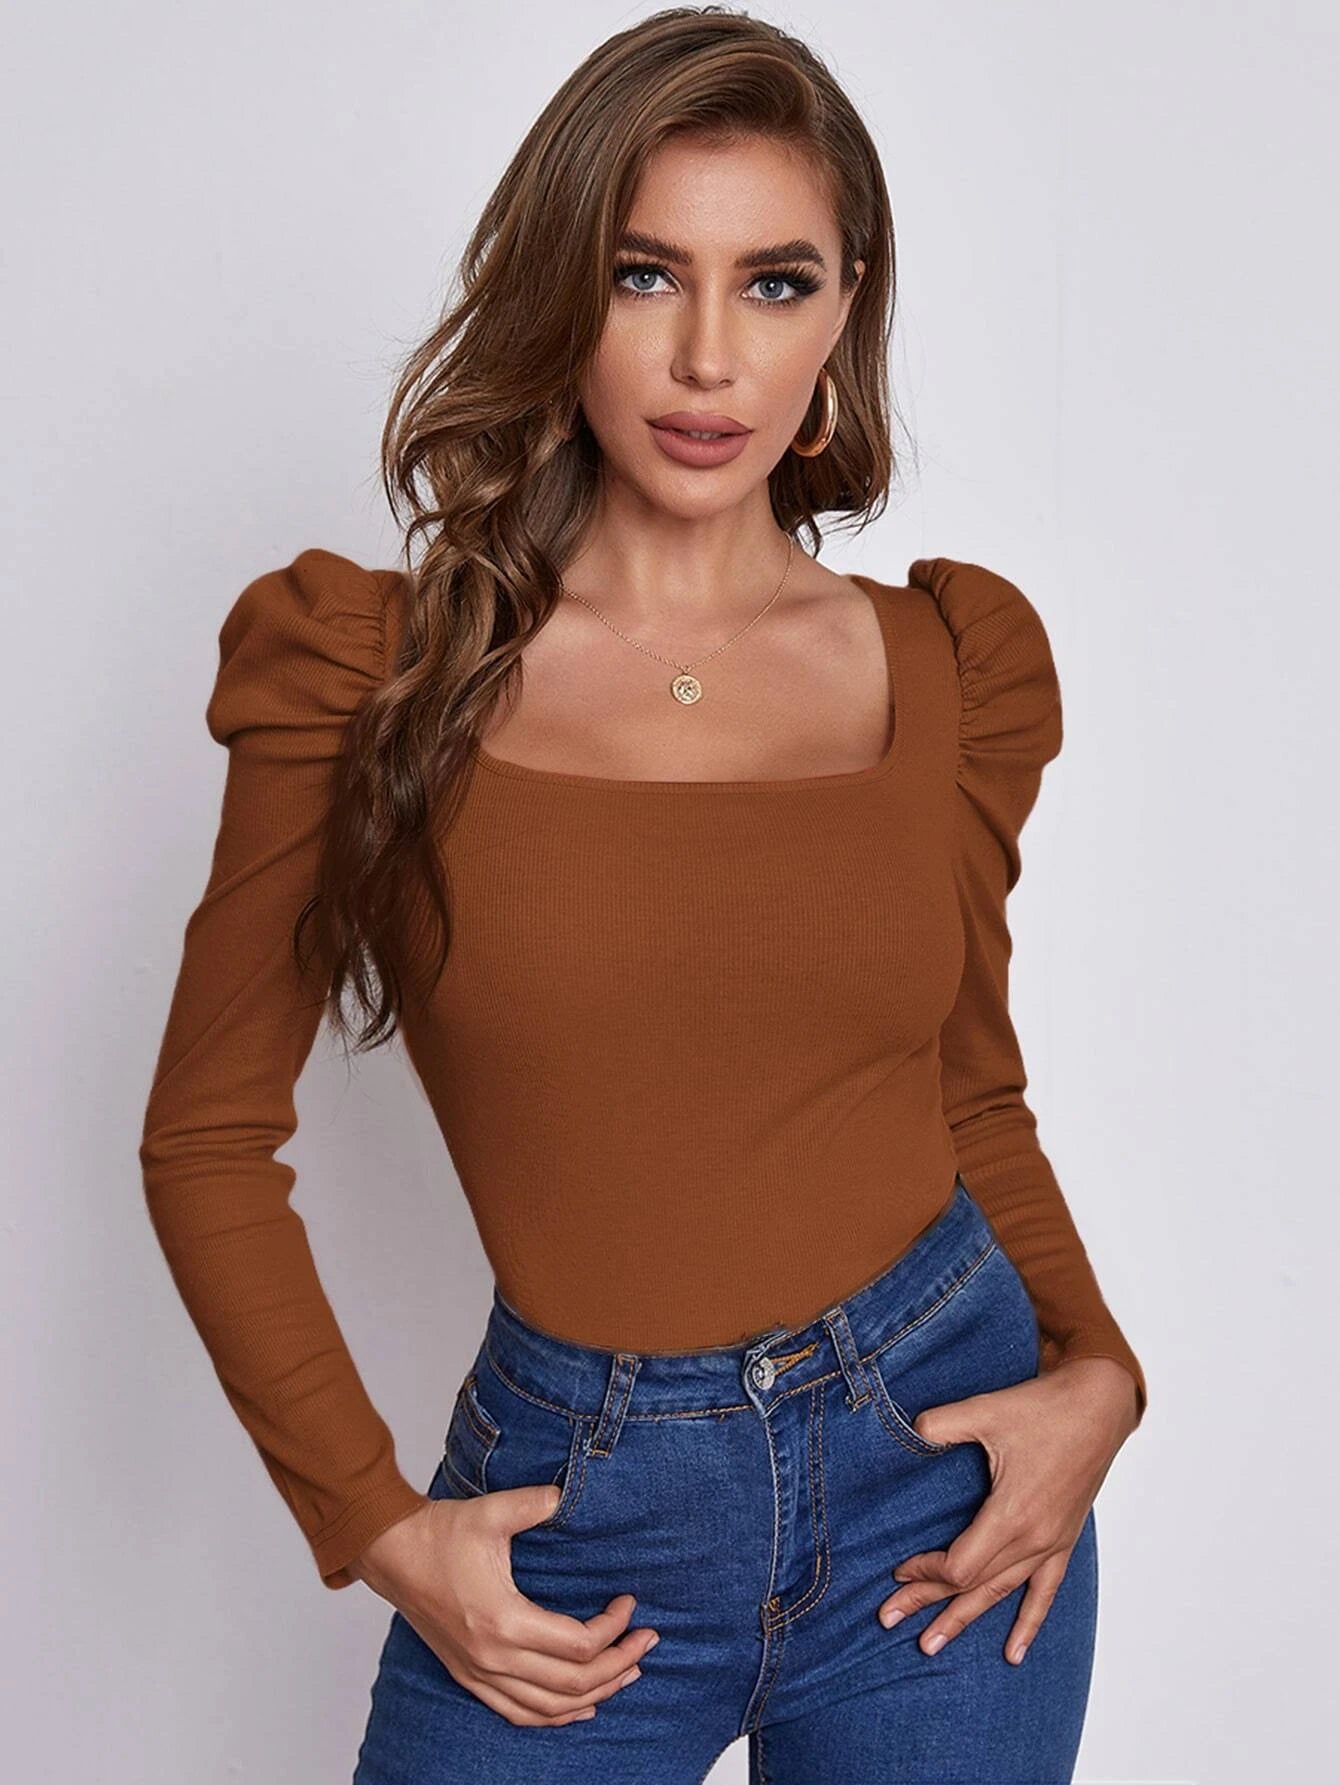 SHEIN EMERY ROSE Square Neck Leg-of-mutton Sleeve Top